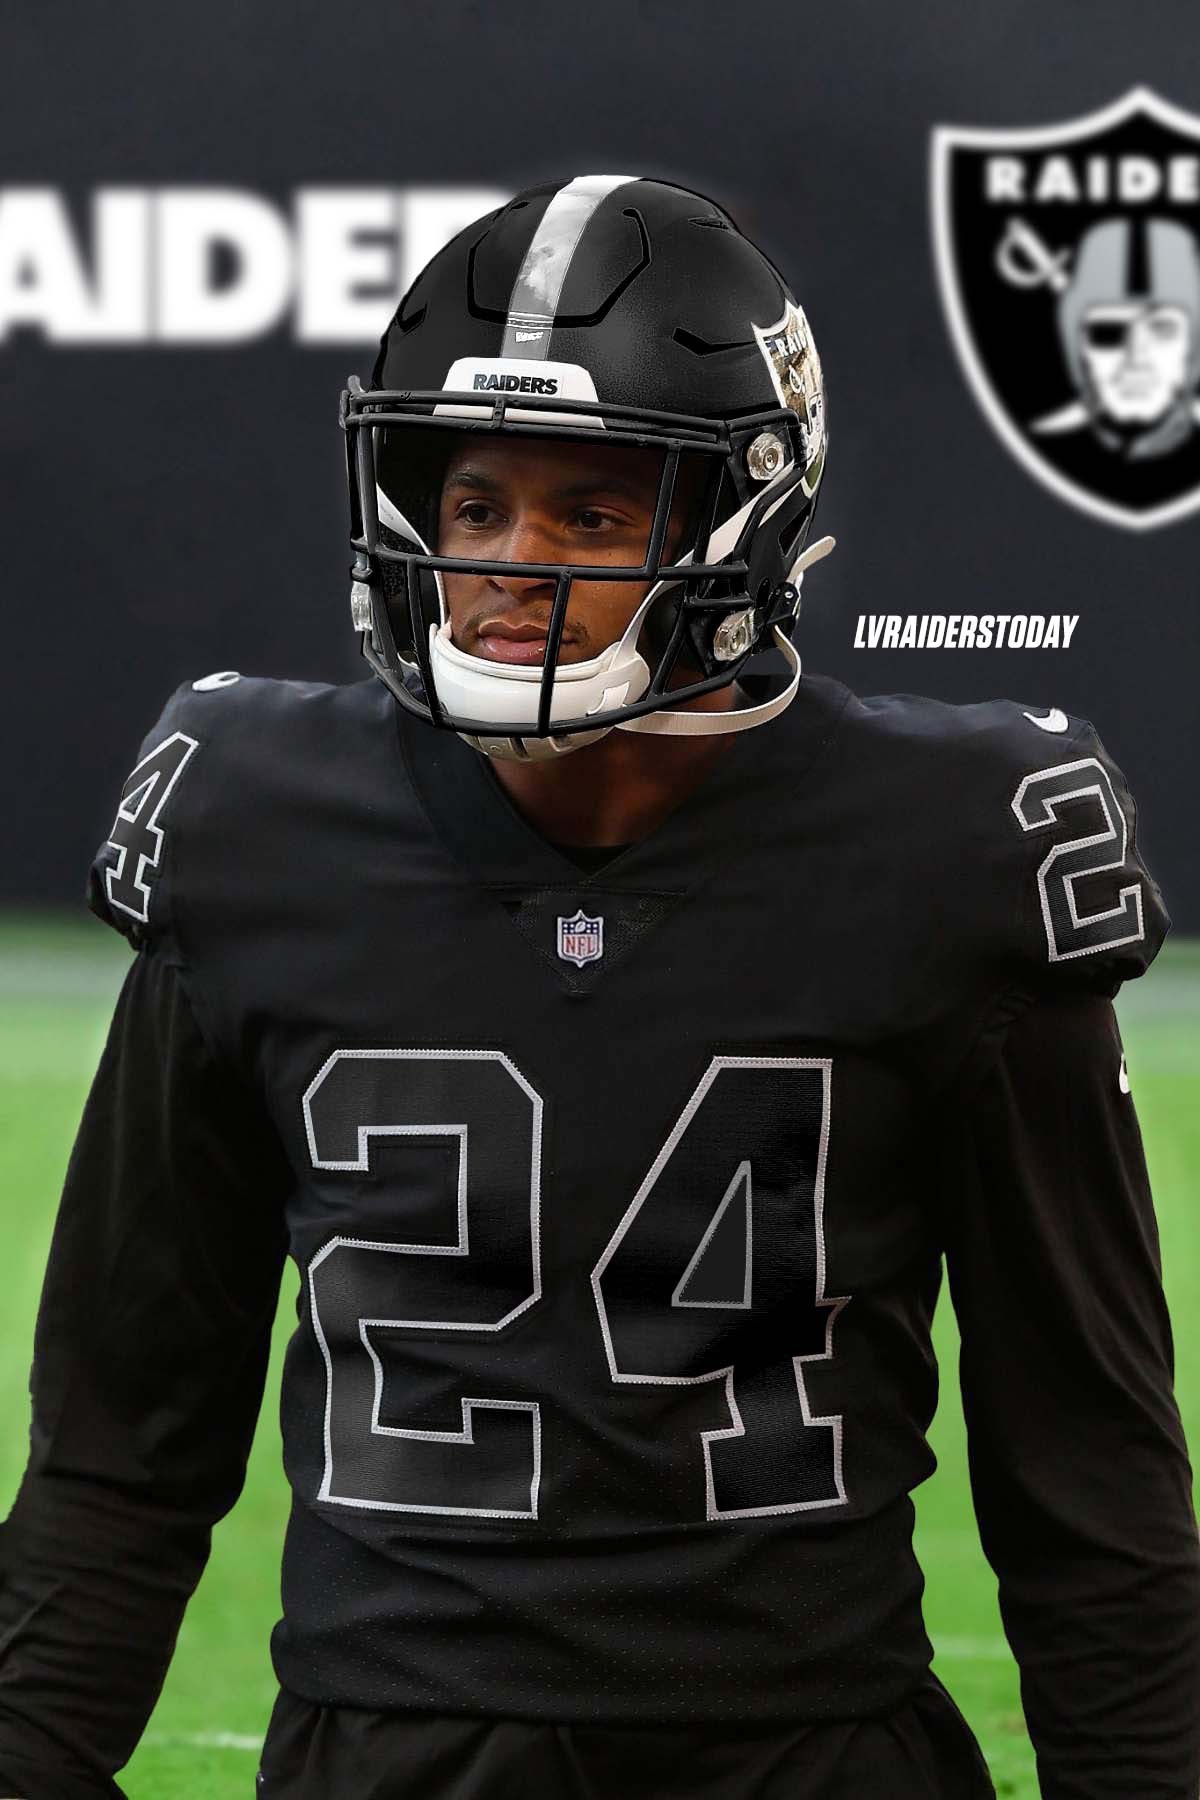 on Twitter: "Some of y'all asked for a #Raiders Blackout jersey 👀  https://t.co/7tni00N8xw" / Twitter